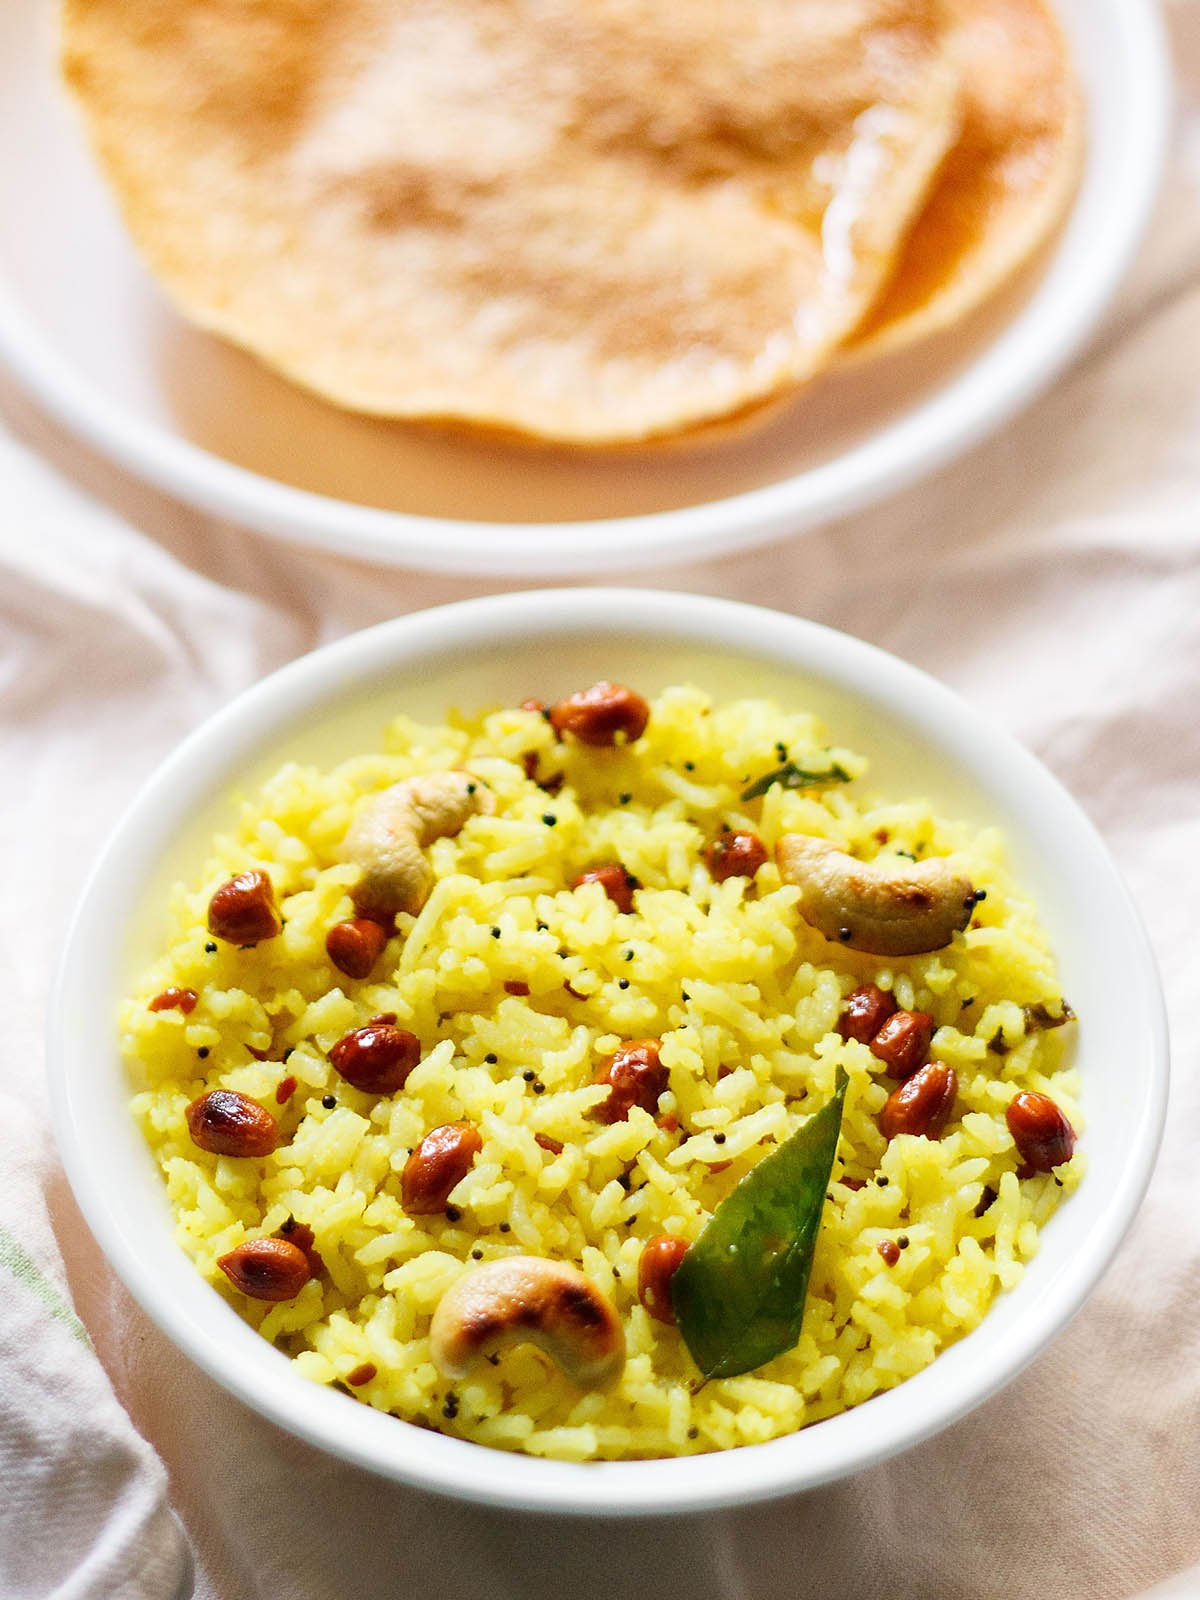 bright yellow colored lemon rice or chitranna served in a white bowl on a white cotton cloth with a side of fried papaddums